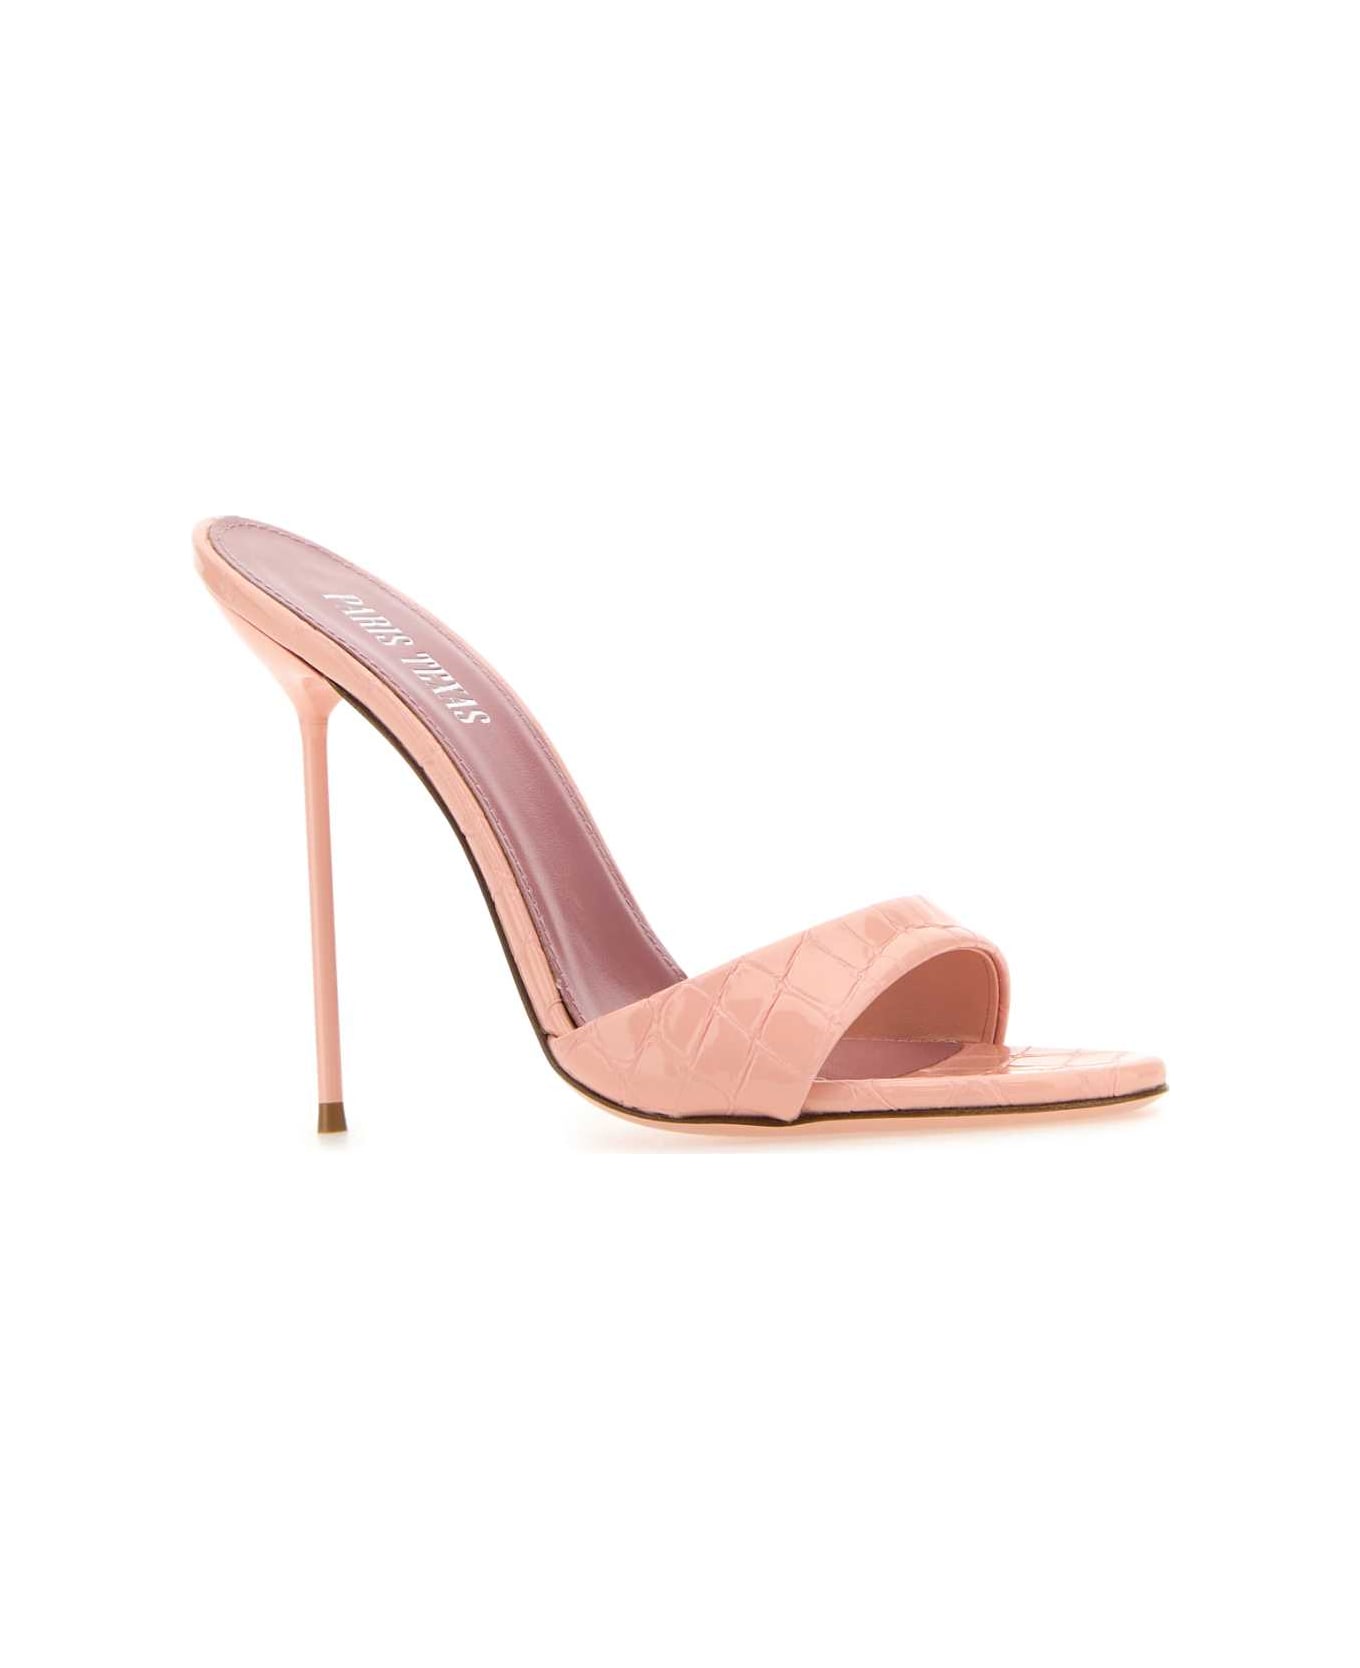 Paris Texas Pink Leather Lidia Mules - PINK